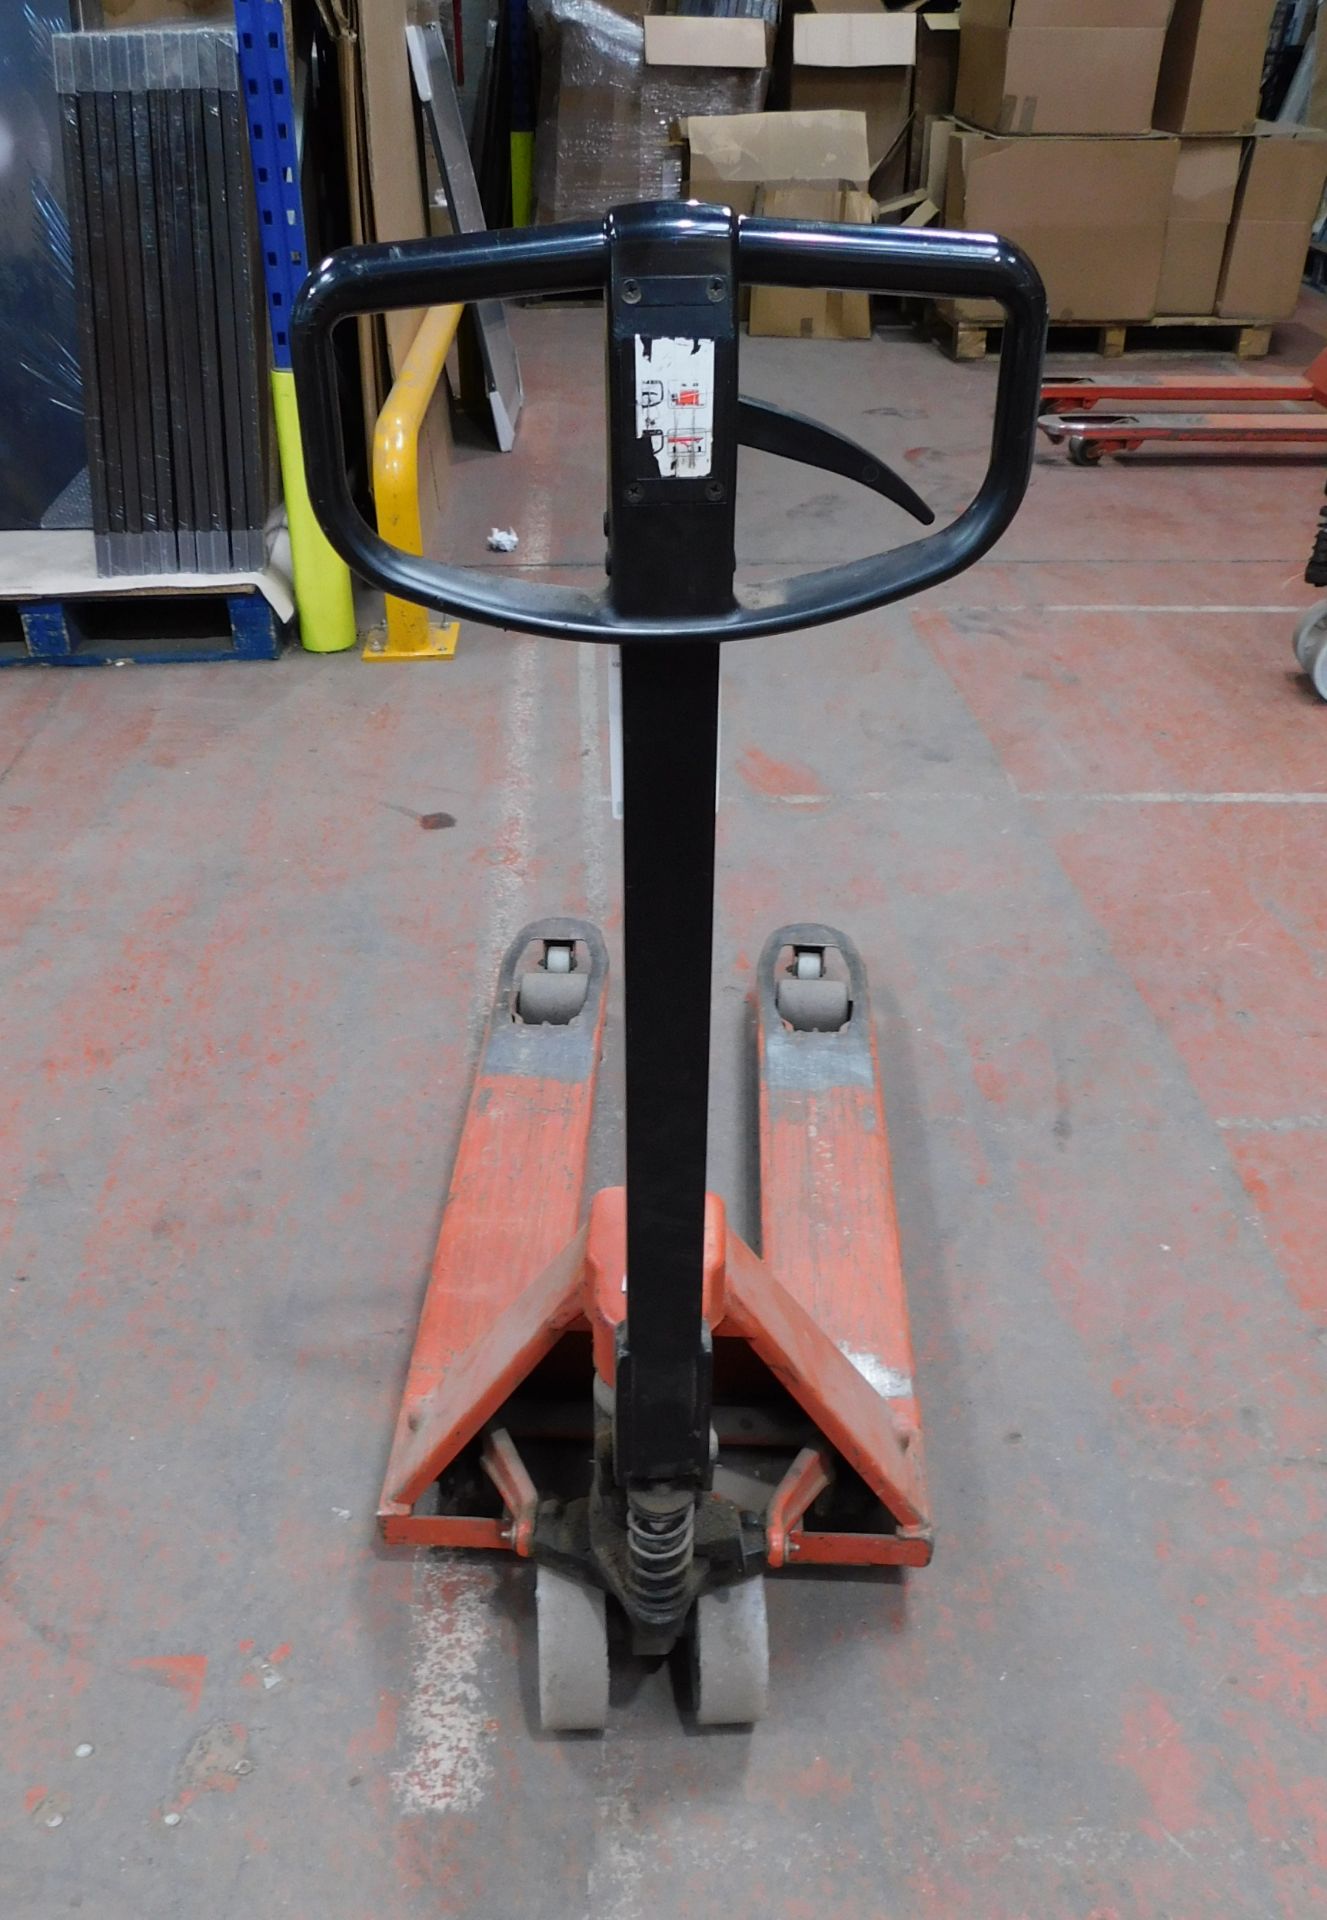 Narrow Blade BT Rolatruc Pallet Truck (Collection – Friday 25th, Tuesday 29th or Wednesday 30th - Image 4 of 4